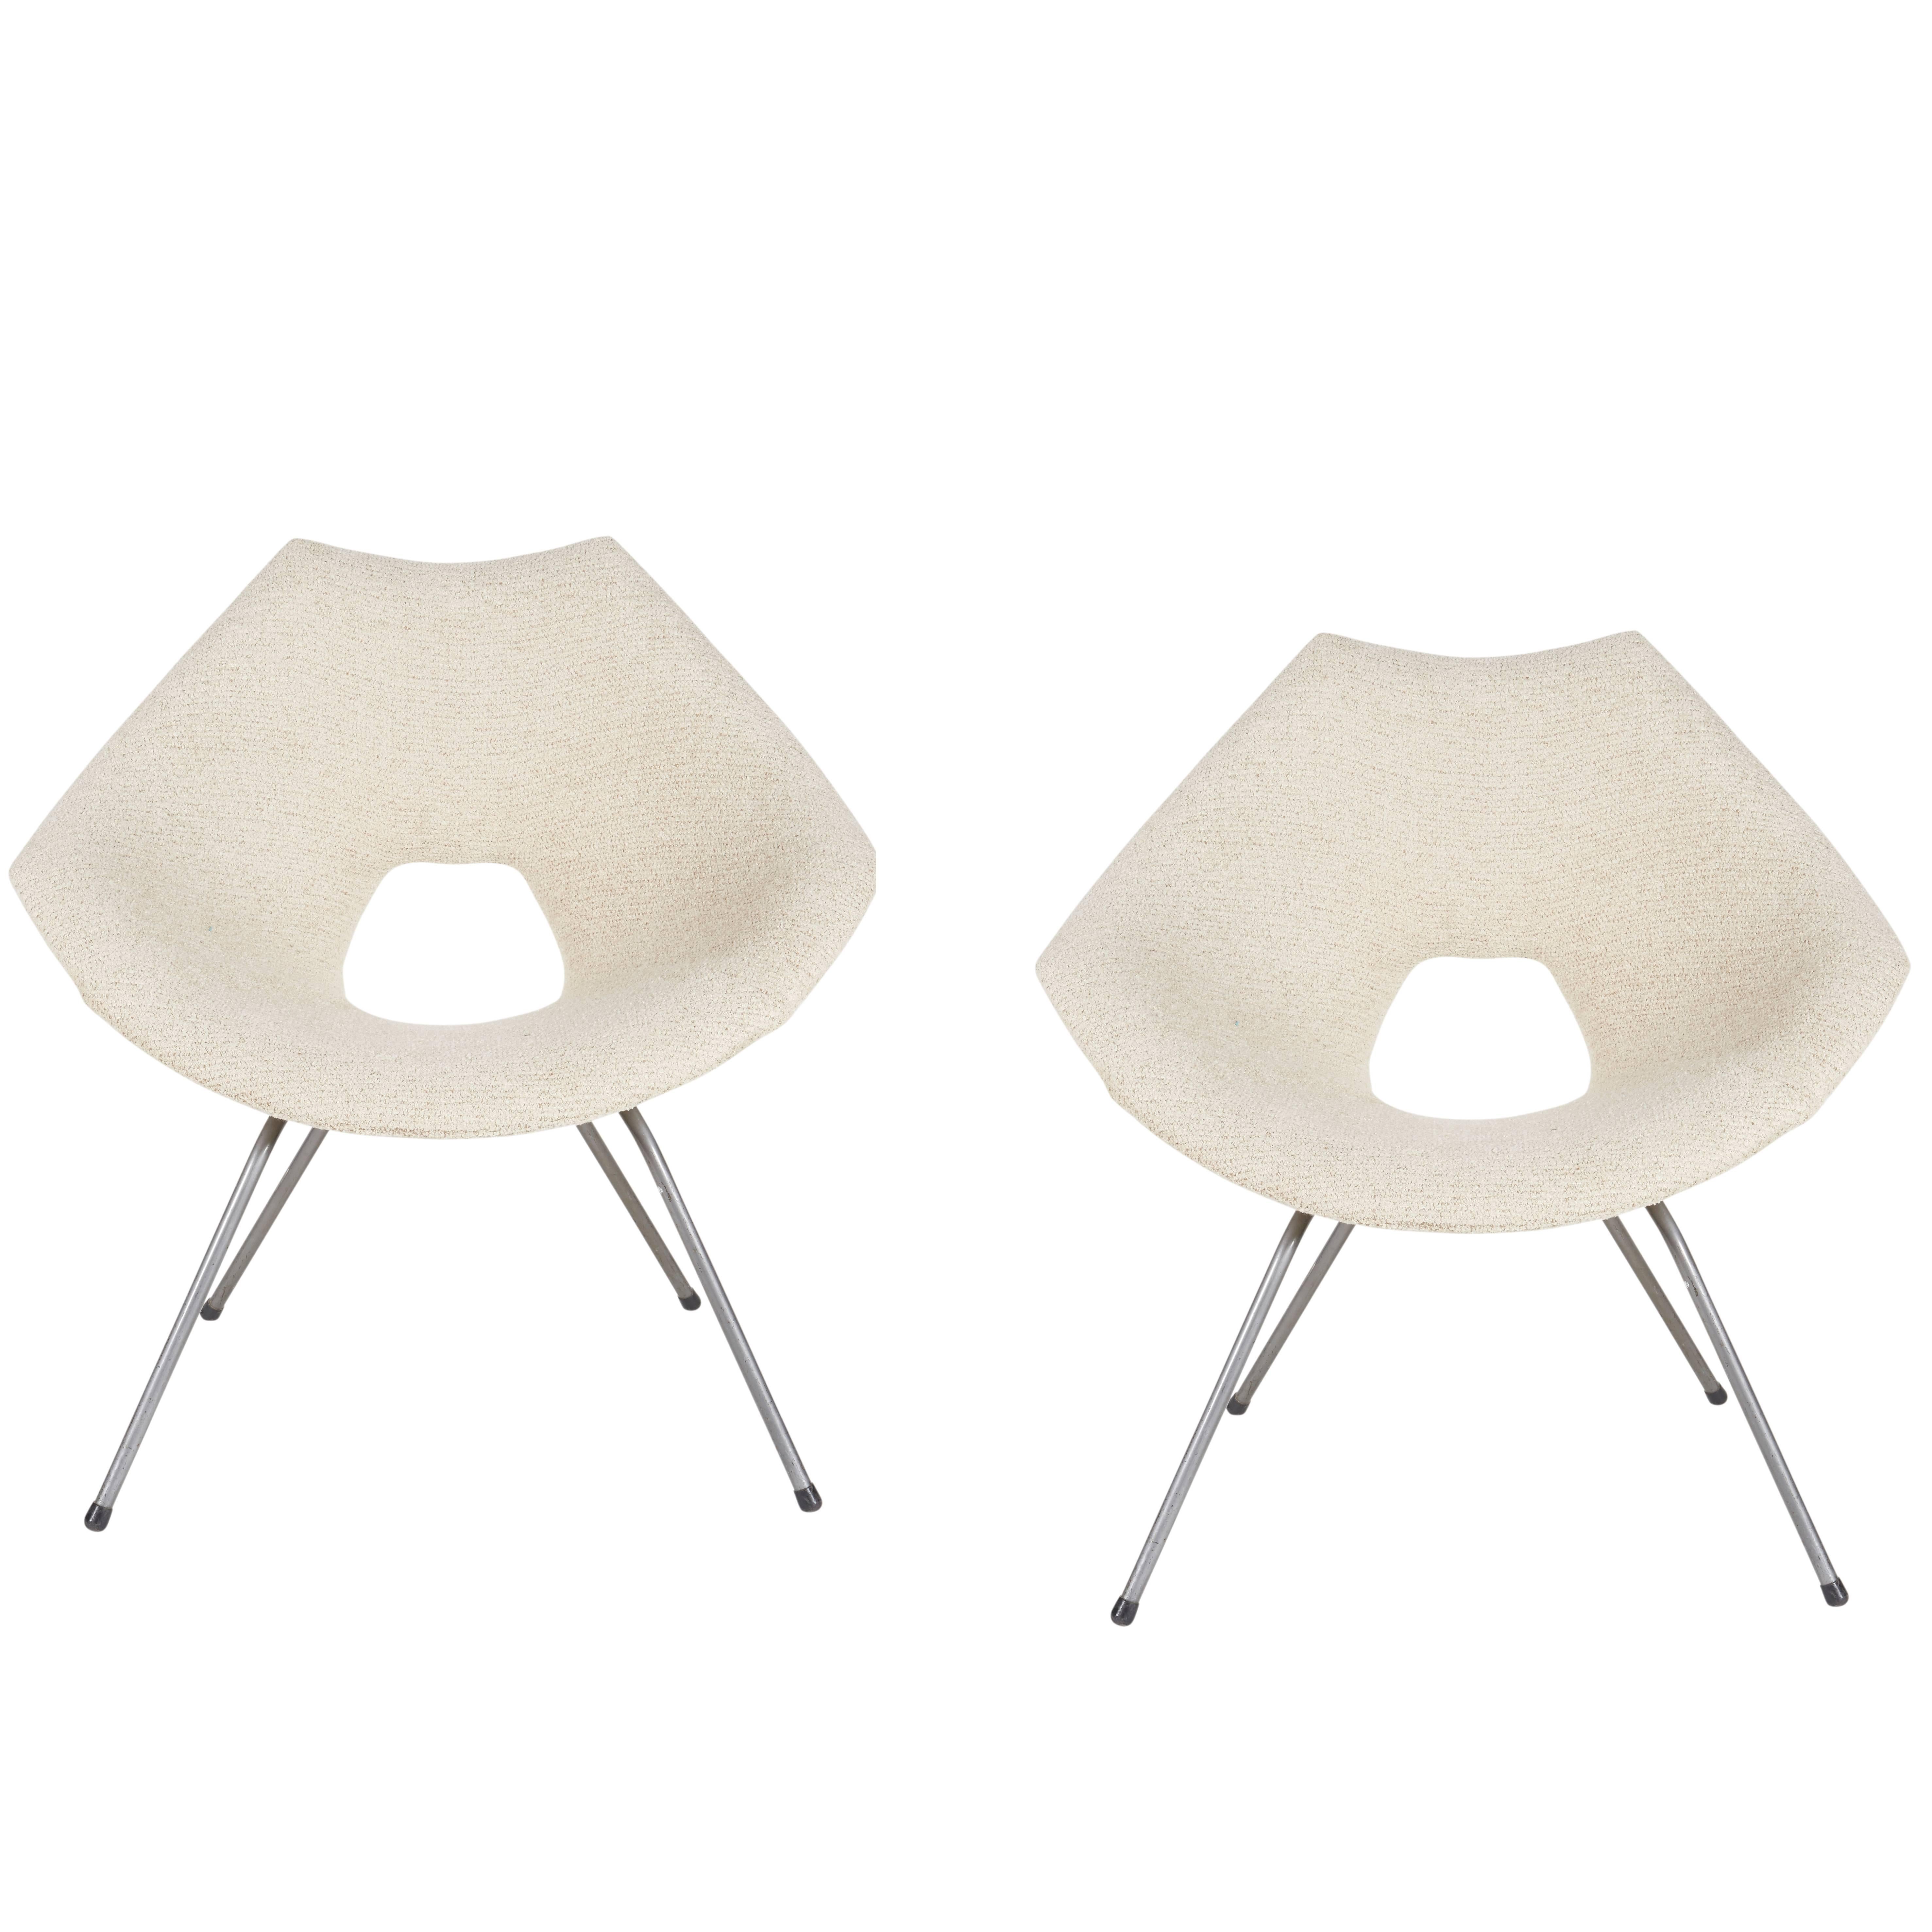 Pair of Sculptural Midcentury Italian Chairs by Augusto Bozzi